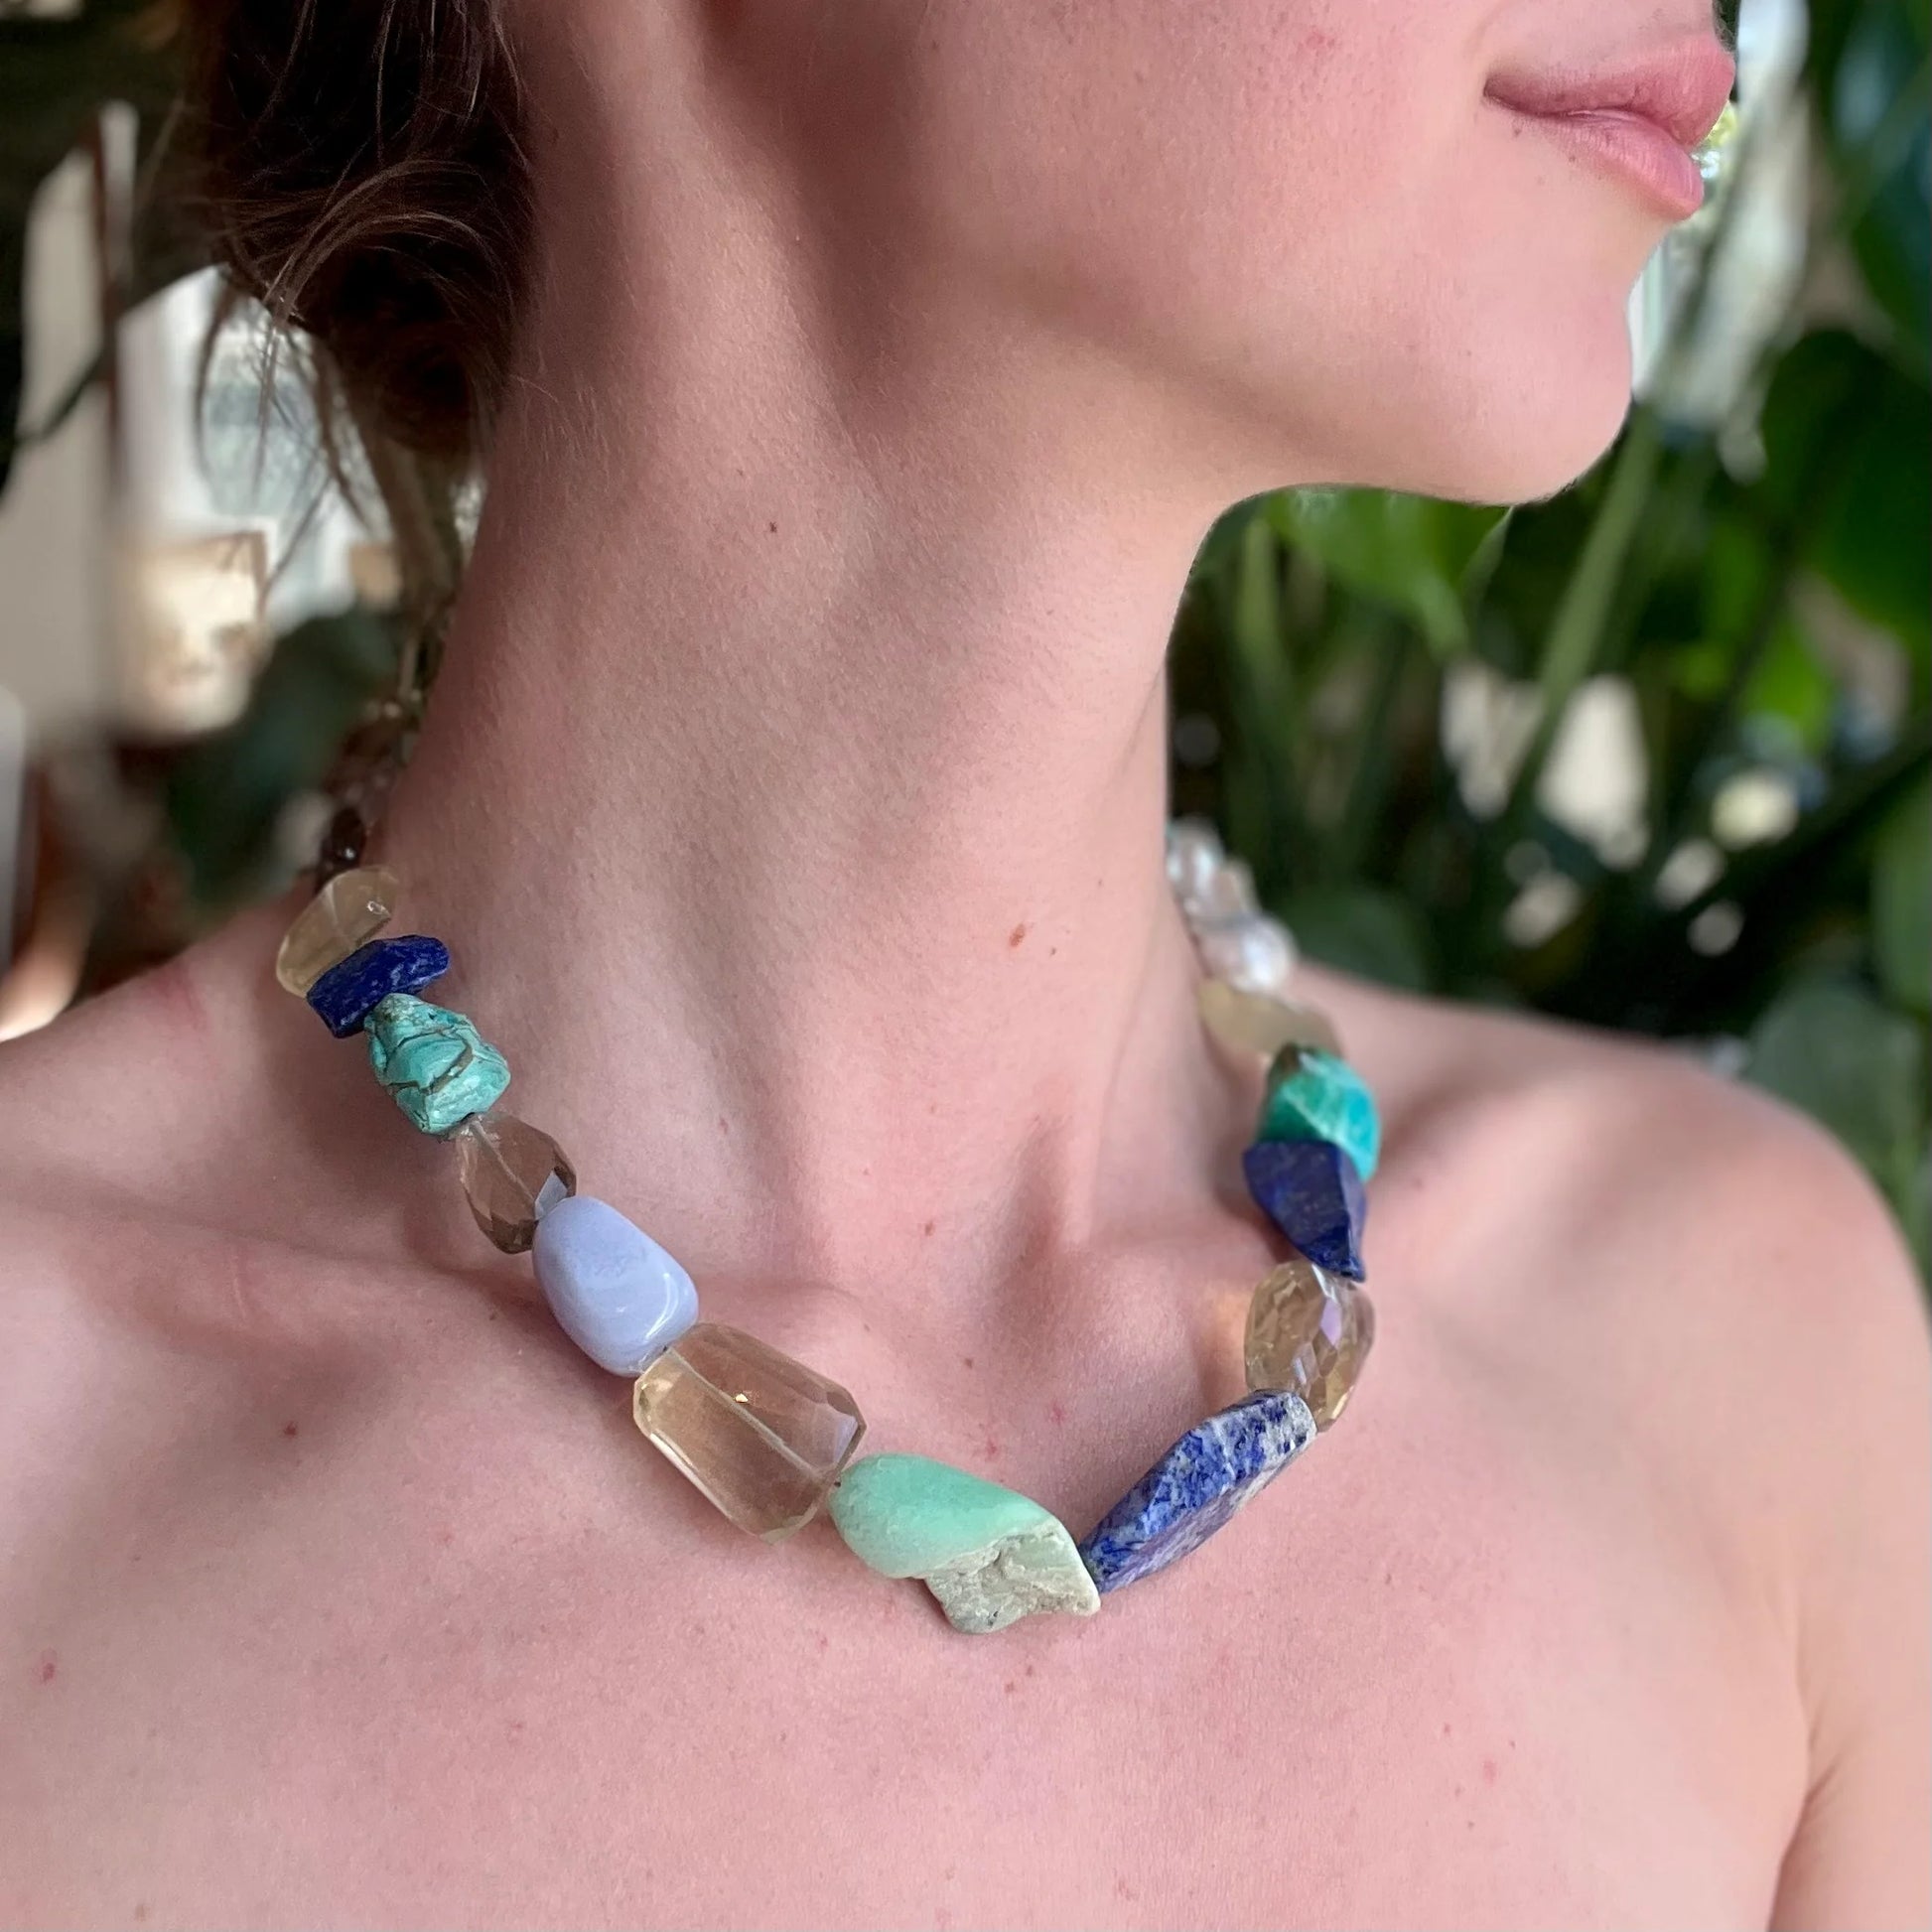 Aphrodite - water goddess born from the ocean, a symbol of passion, beauty &amp; pleasure. From of the Dug from the Earth Collection ~ chunky statement necklaces featuring semi precious stones intentionally paired to supercharge your aura. Designed in California by Carrie Marill and made by hand in her SoCal studio.